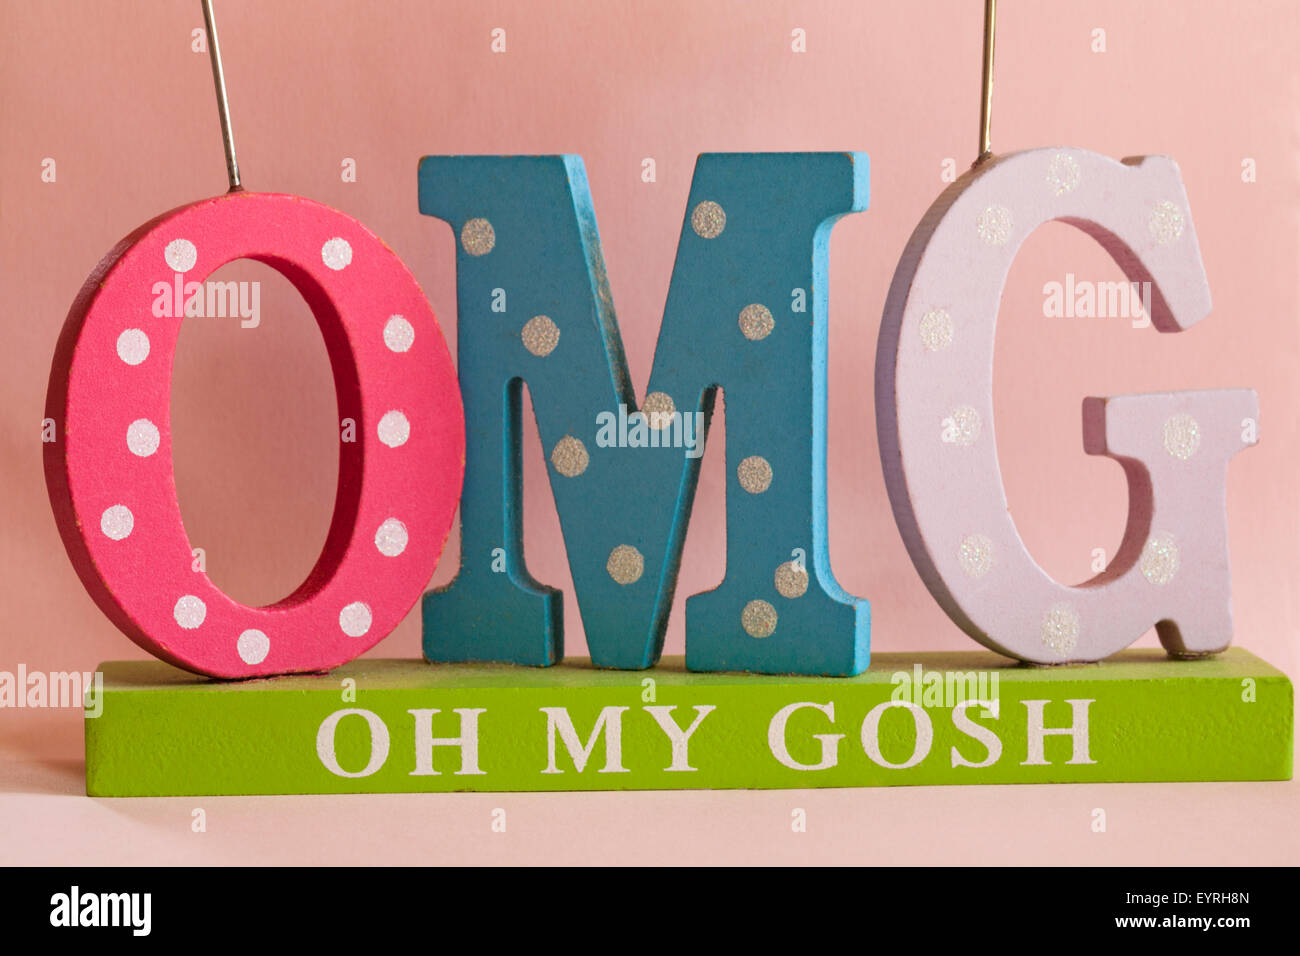 OMG Oh My Gosh or Oh My God decorative letters set against pink background Stock Photo